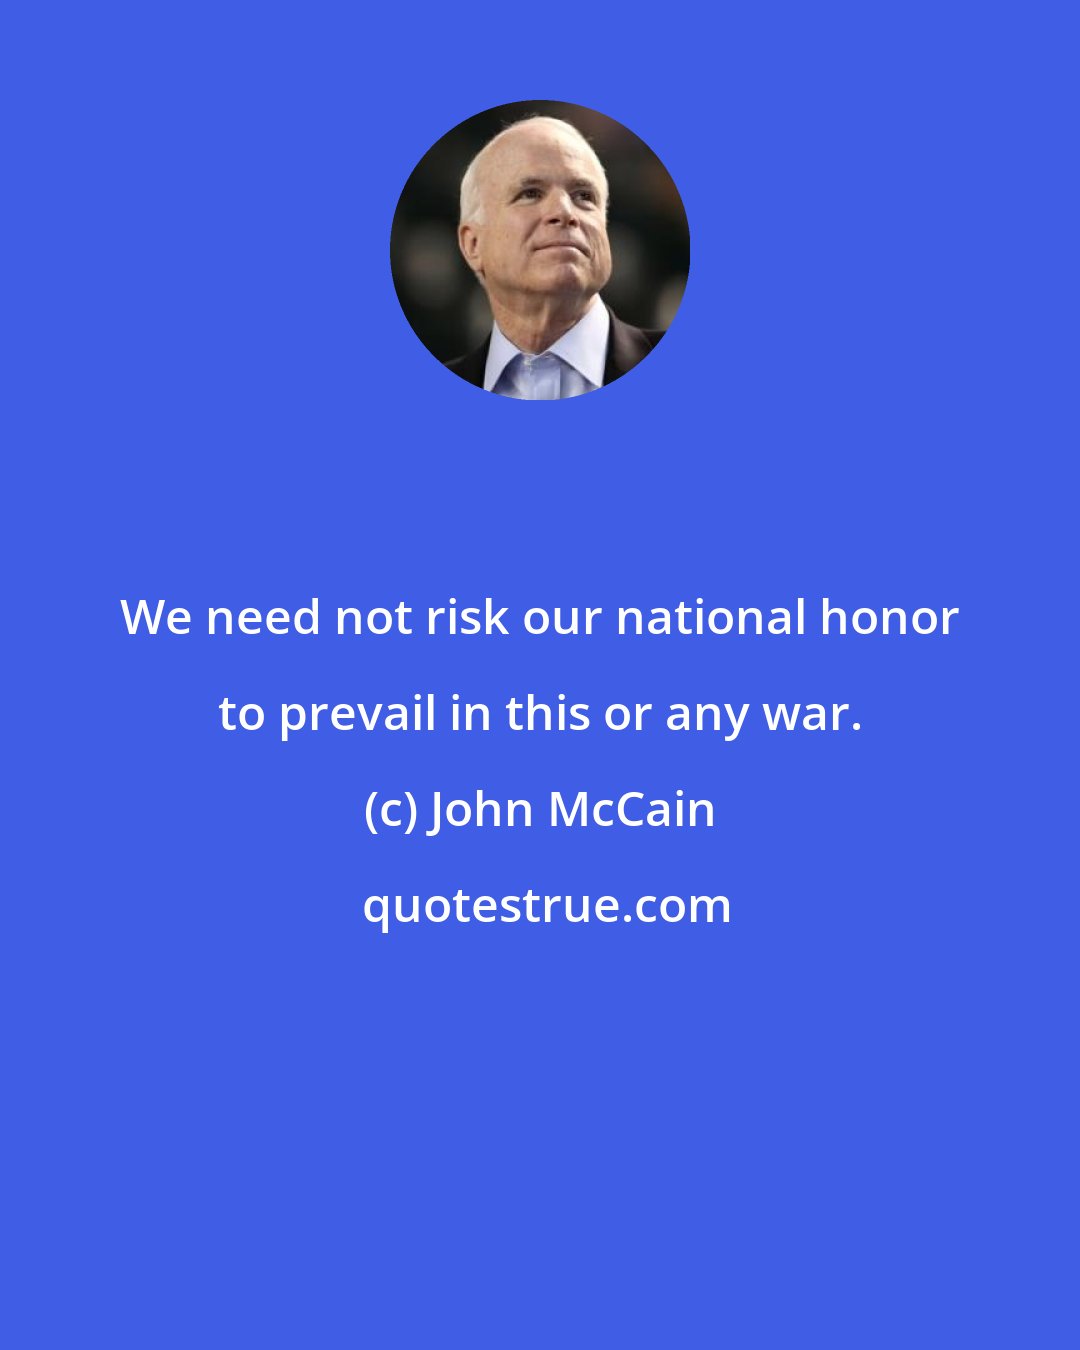 John McCain: We need not risk our national honor to prevail in this or any war.